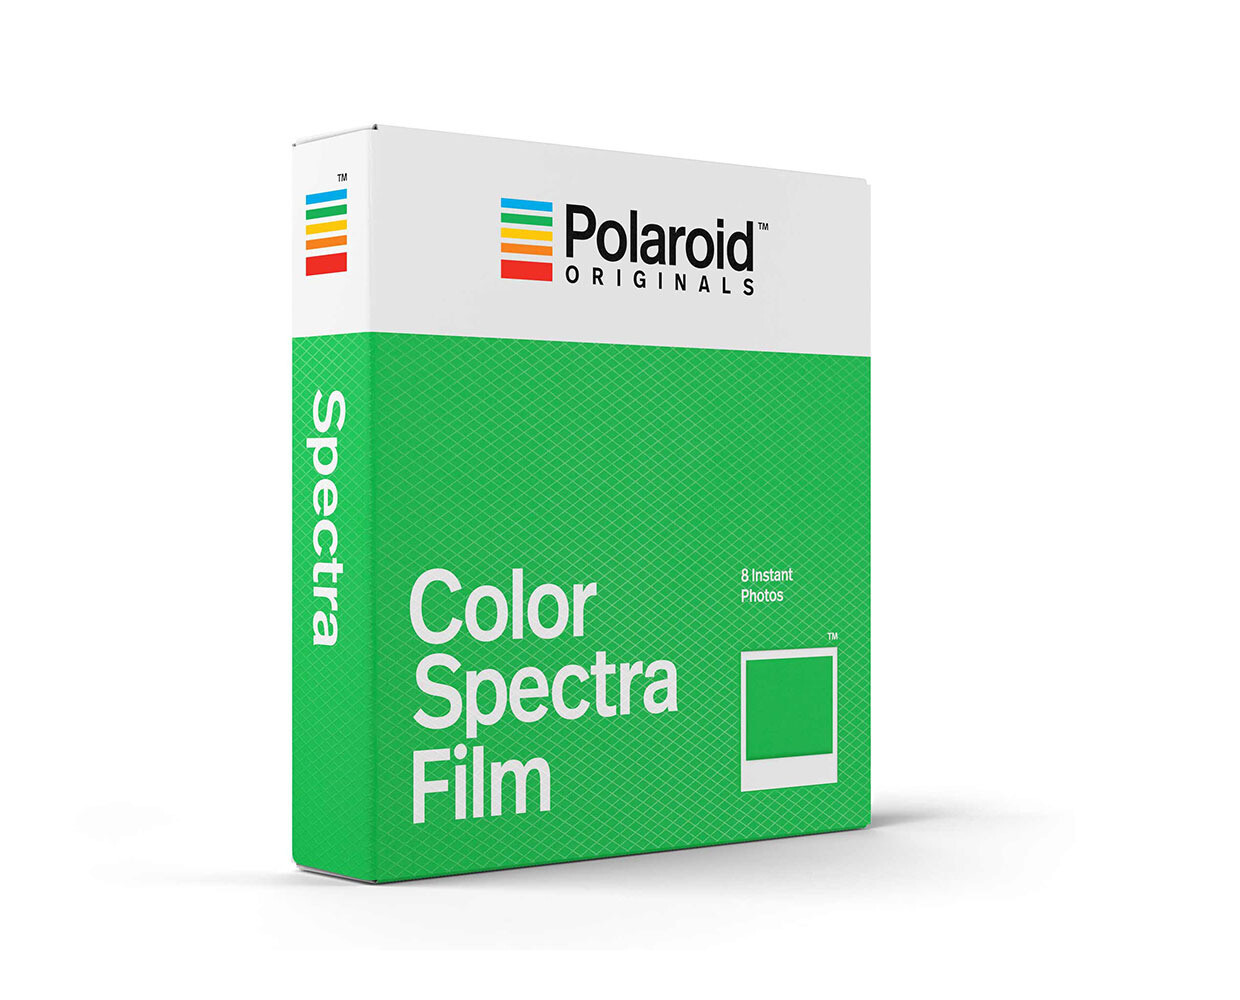 Polaroid Originals IMAGE/Spectra COLOR,  for  Polaroid  Image/Spectra Cameras - 640 ASA - 8 expositions - Produced 04-2018 - Stored in refrigerator ​​